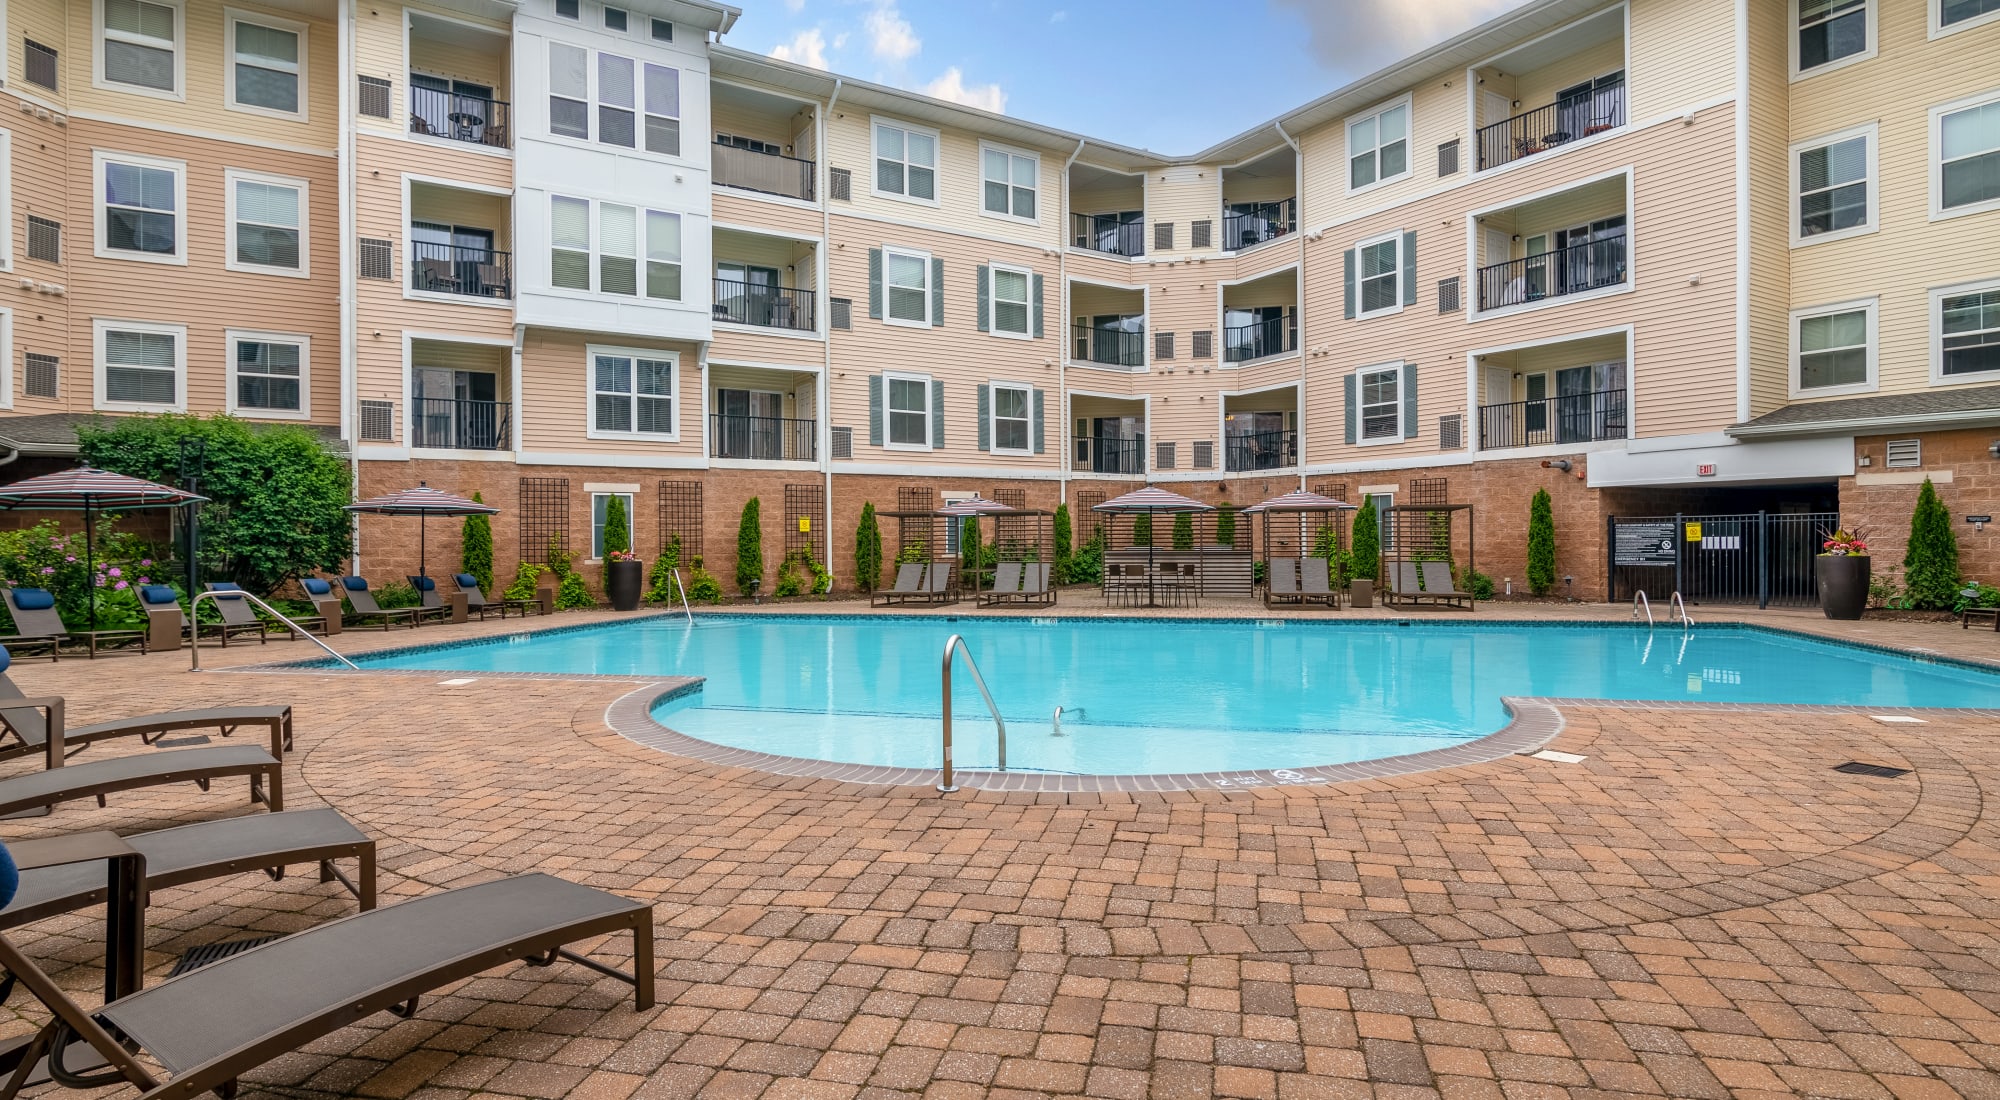 Amenities at Sofi Gaslight Commons in South Orange, New Jersey